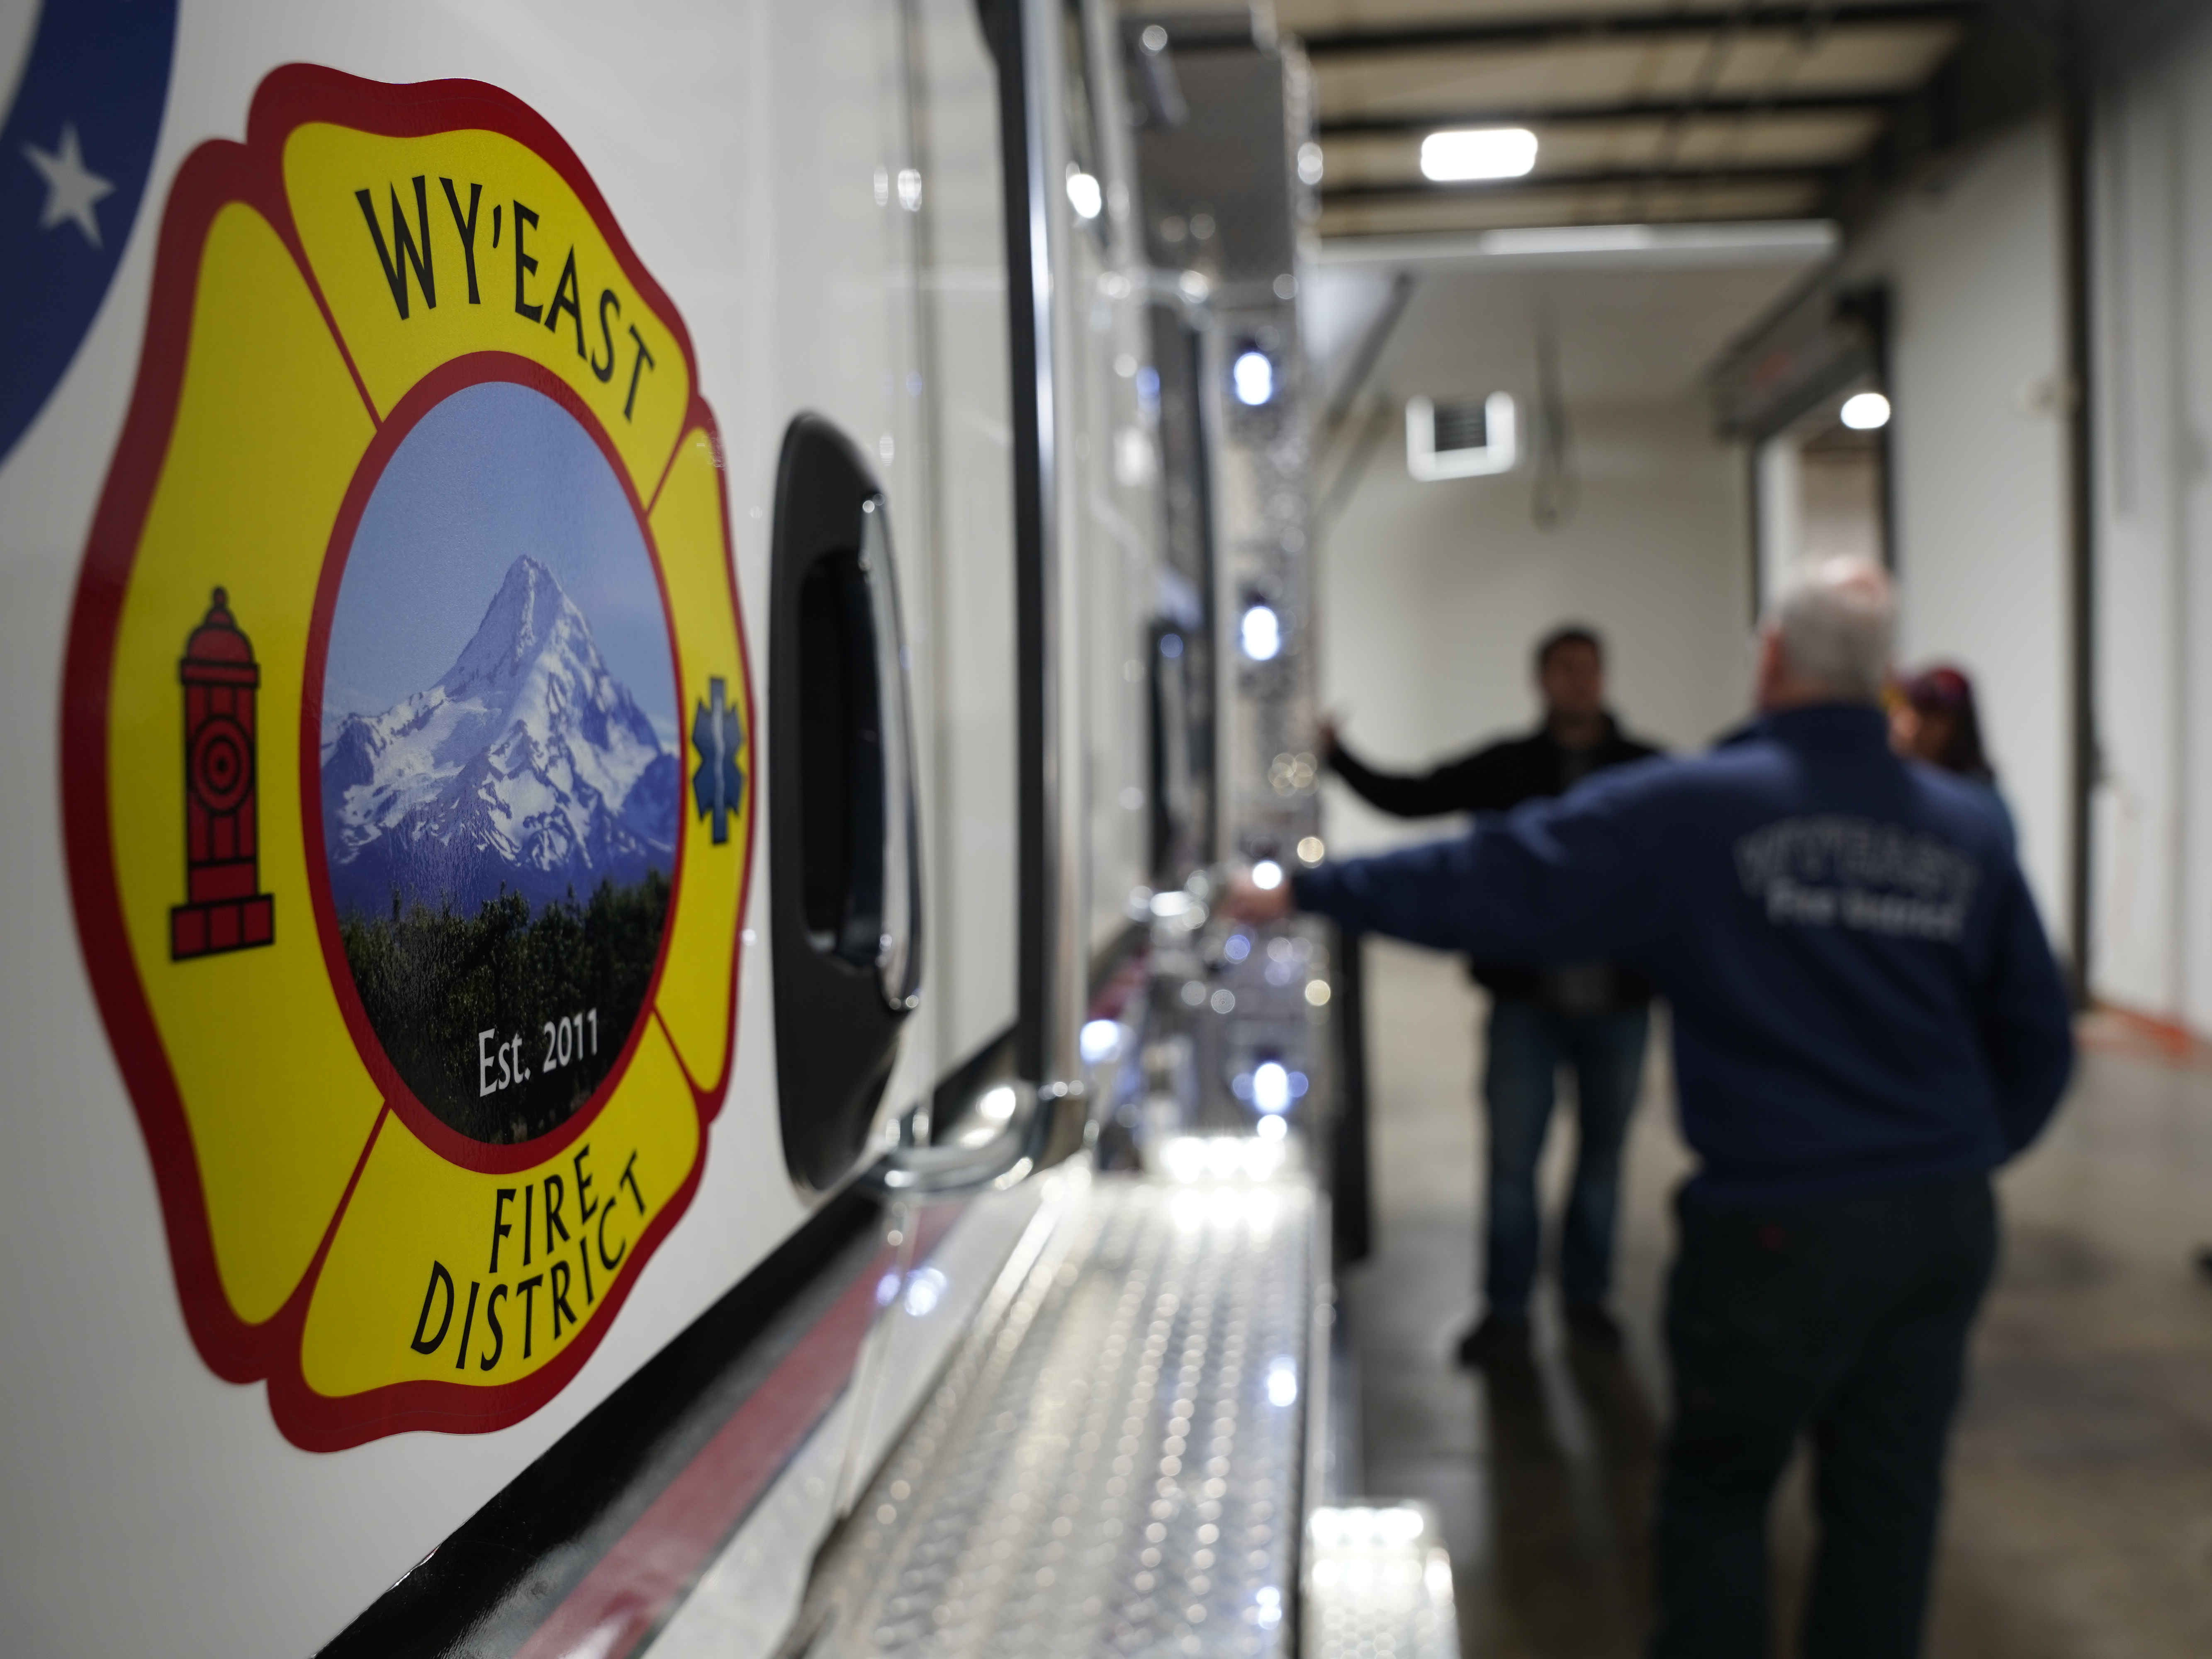 Wy'East Fire delivery day